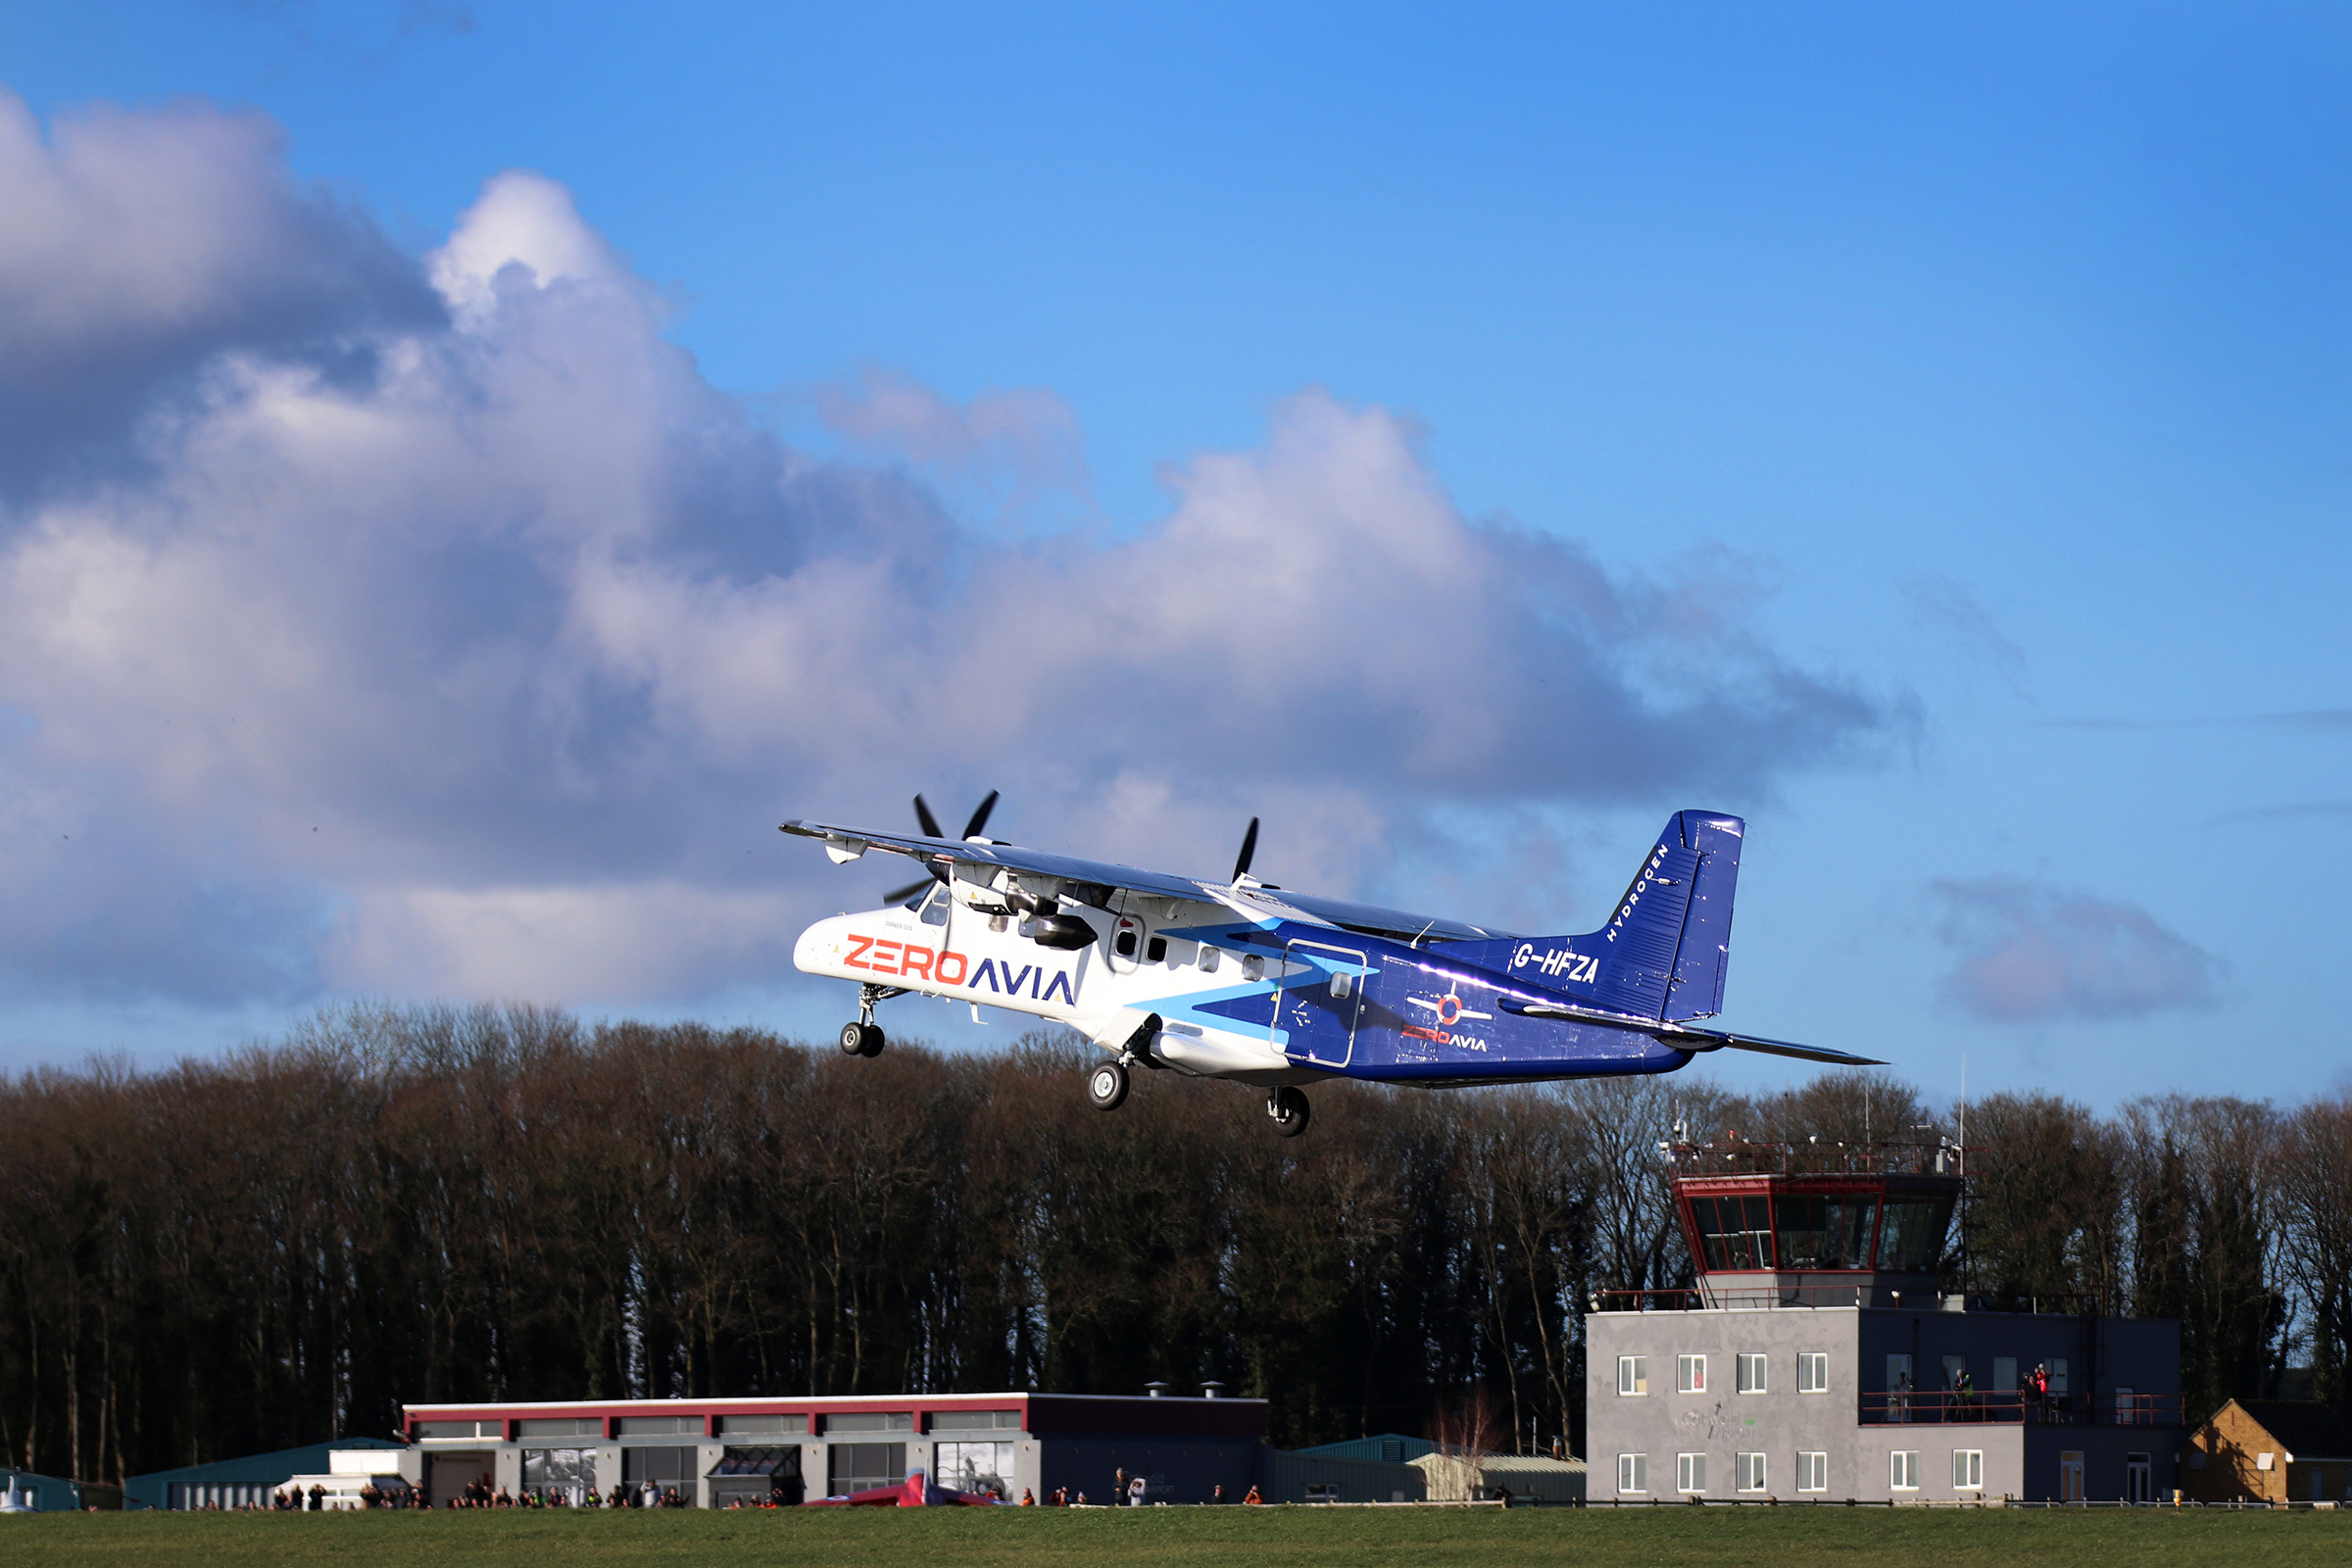 A demonstration of propellers driven by a HyperTruck ground-test rig in Everett, Wash., on May 1. (Courtesy ZeroAvia)